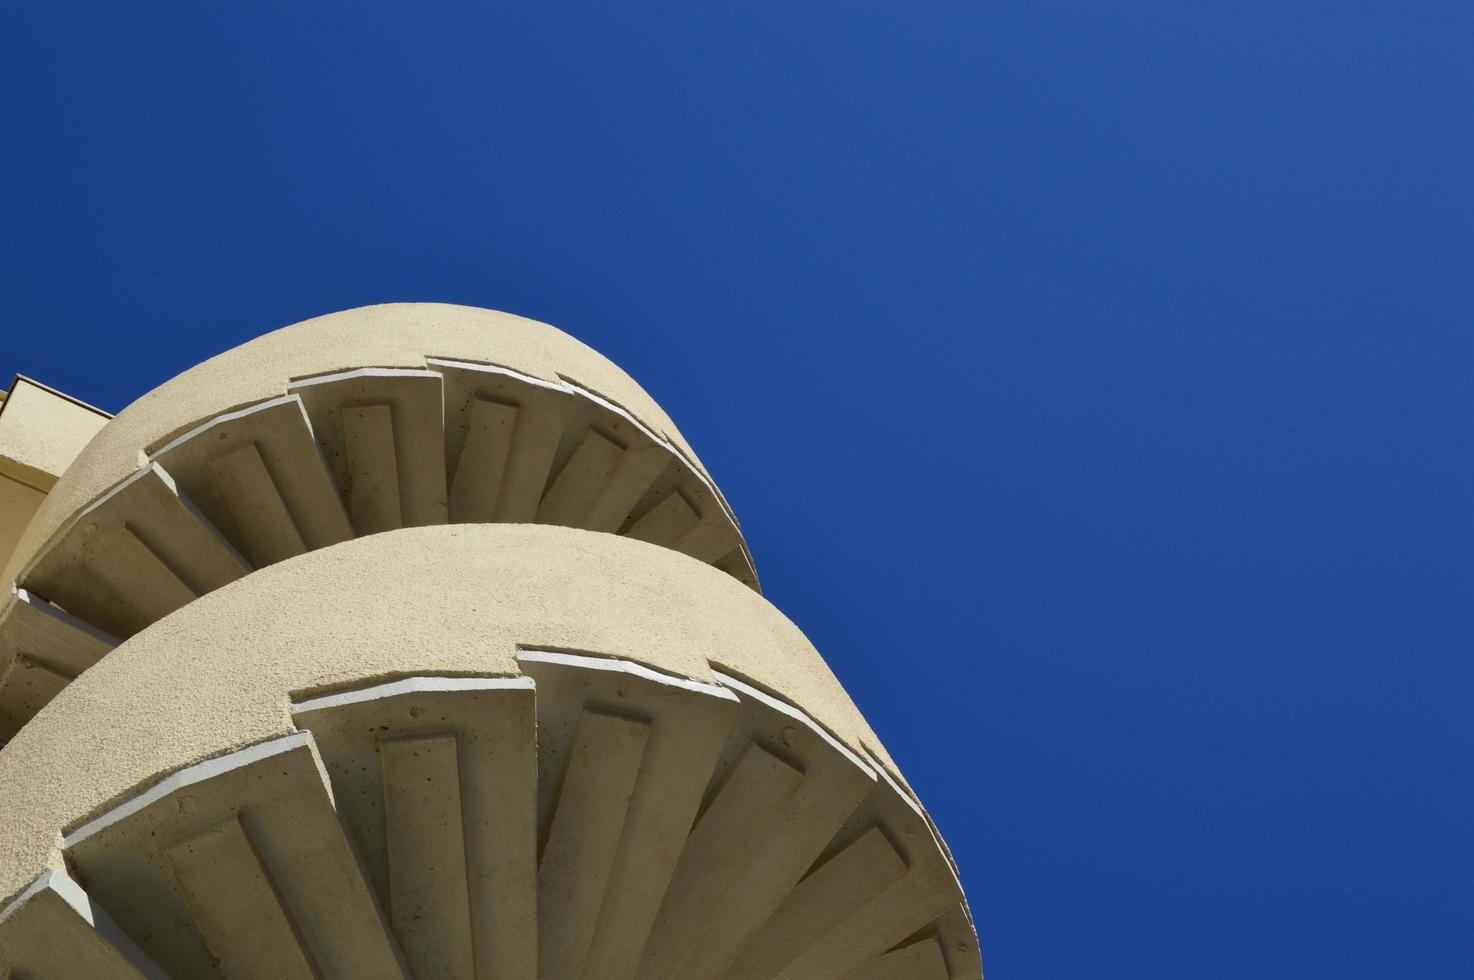 Spiral staircase with blue sky background photo